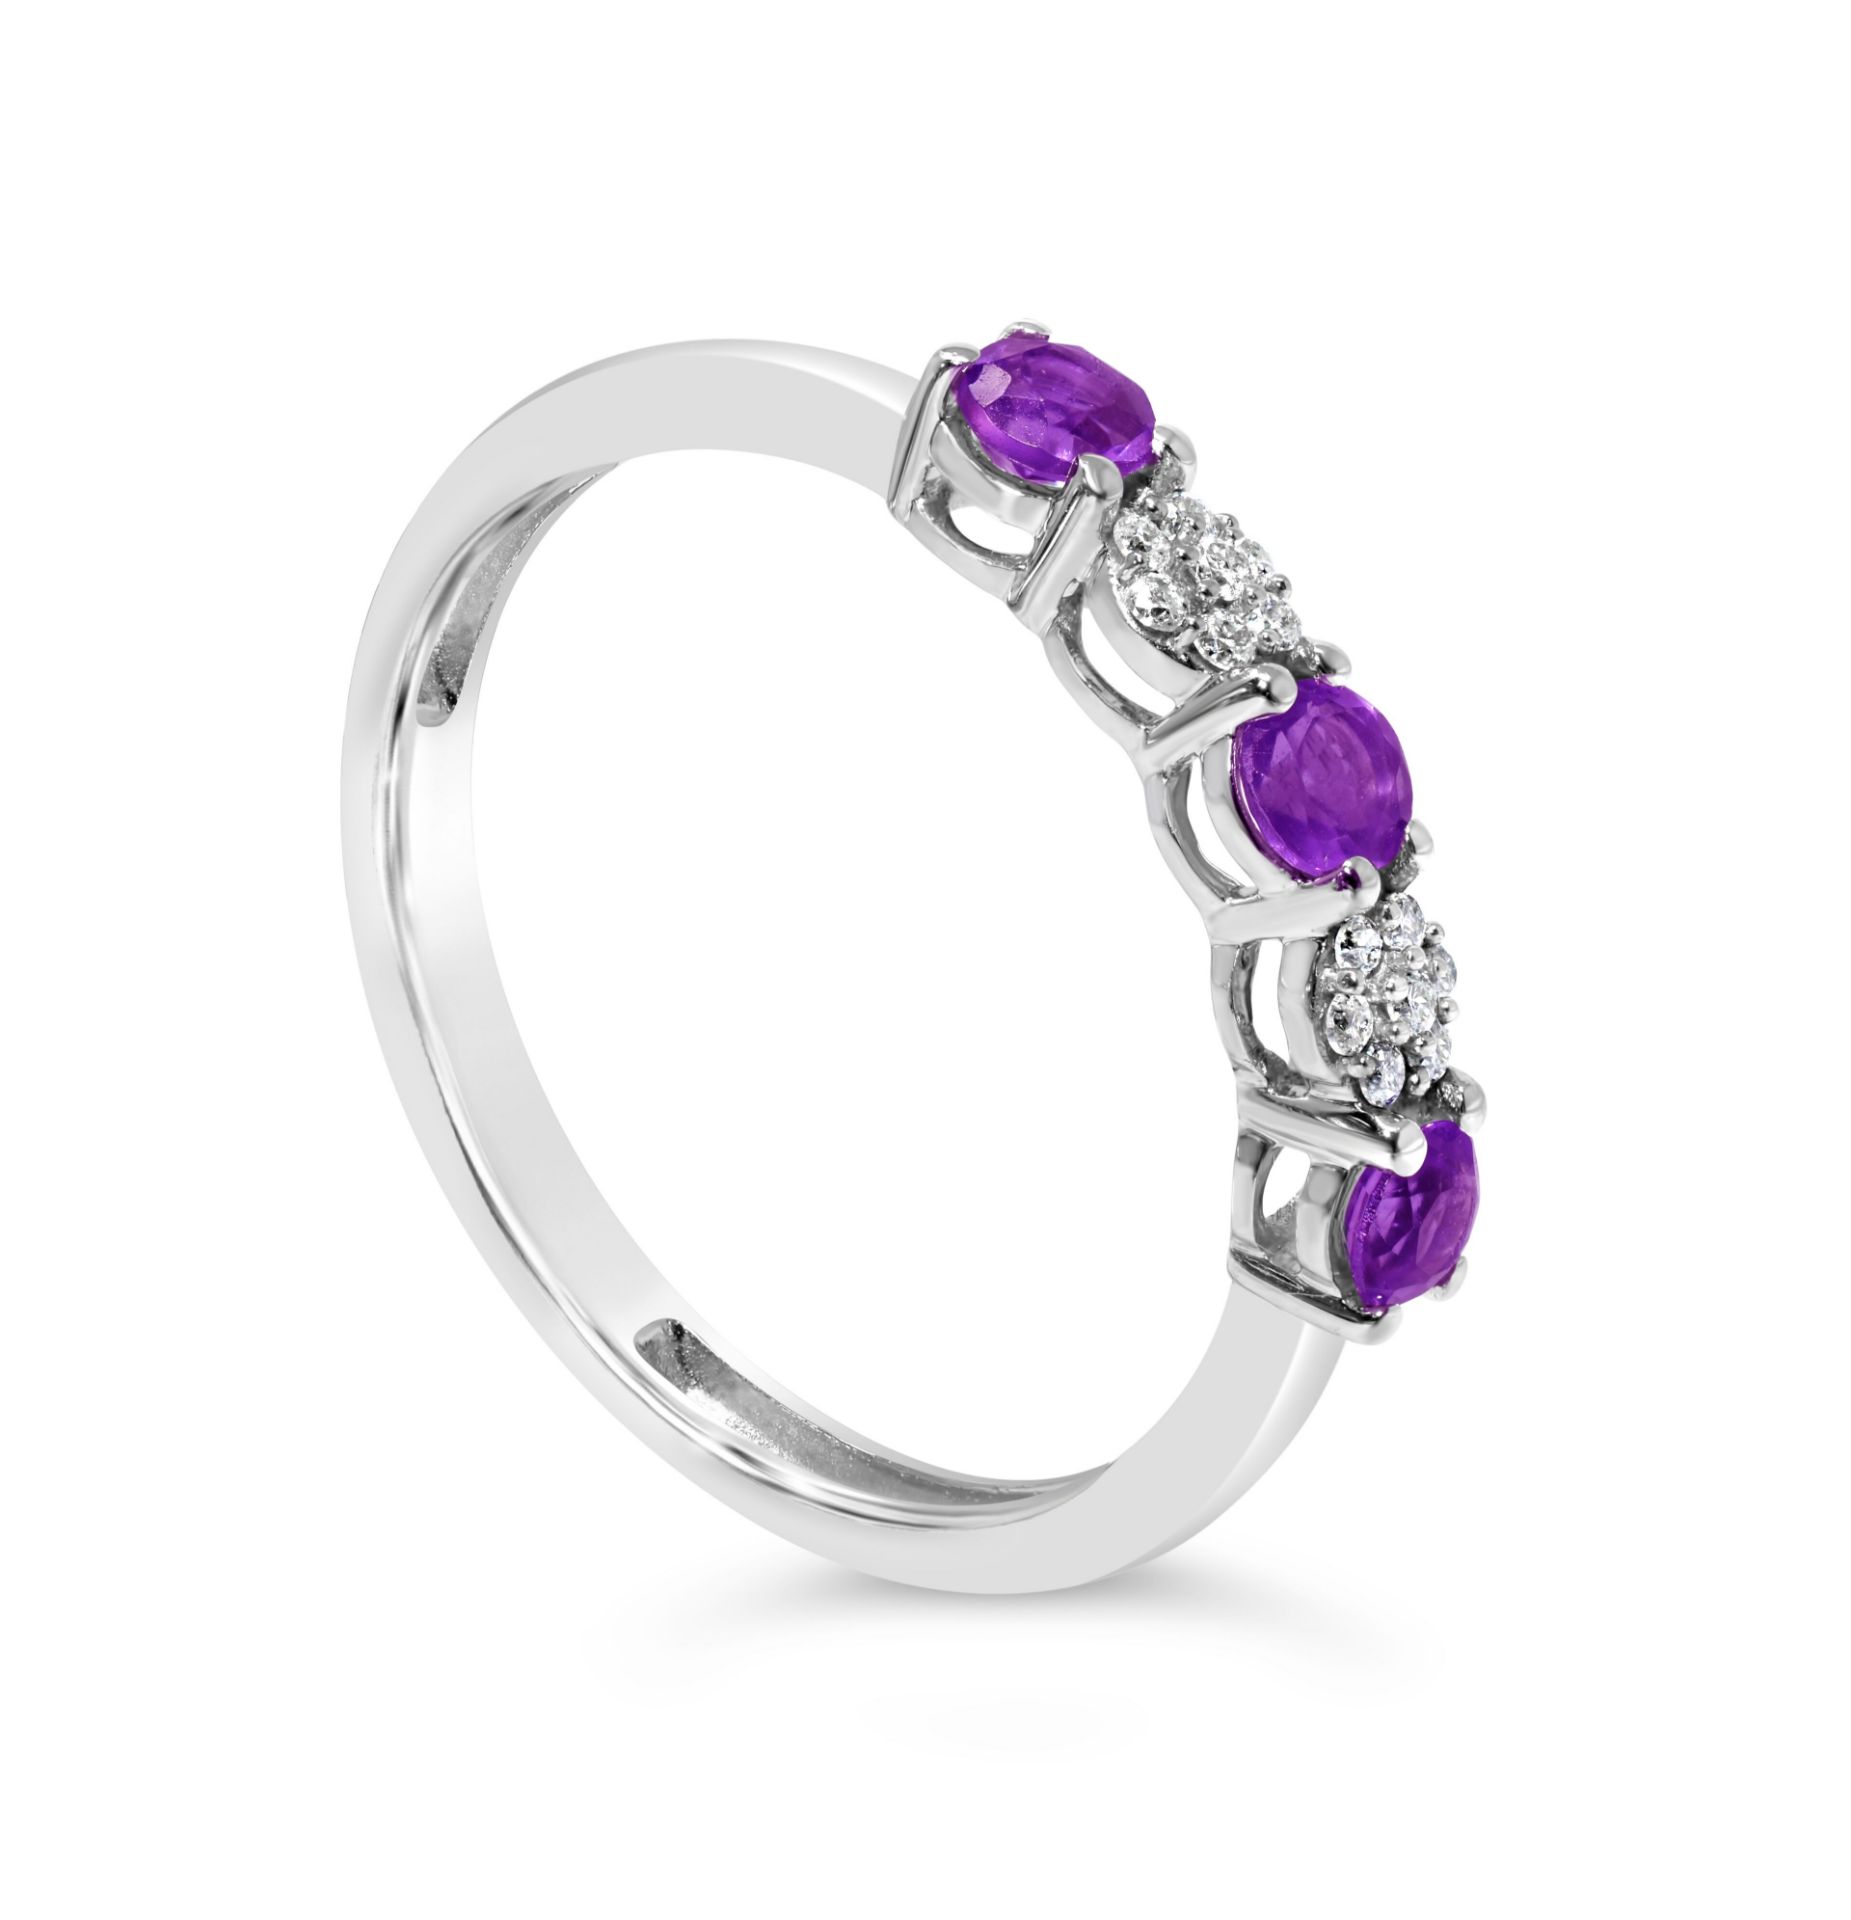 Amethyst and Diamond Eternity Ring, 9ct White Gold RRP £749 Weight 1.48g, Diamond Weight 0.07ct, - Image 2 of 3